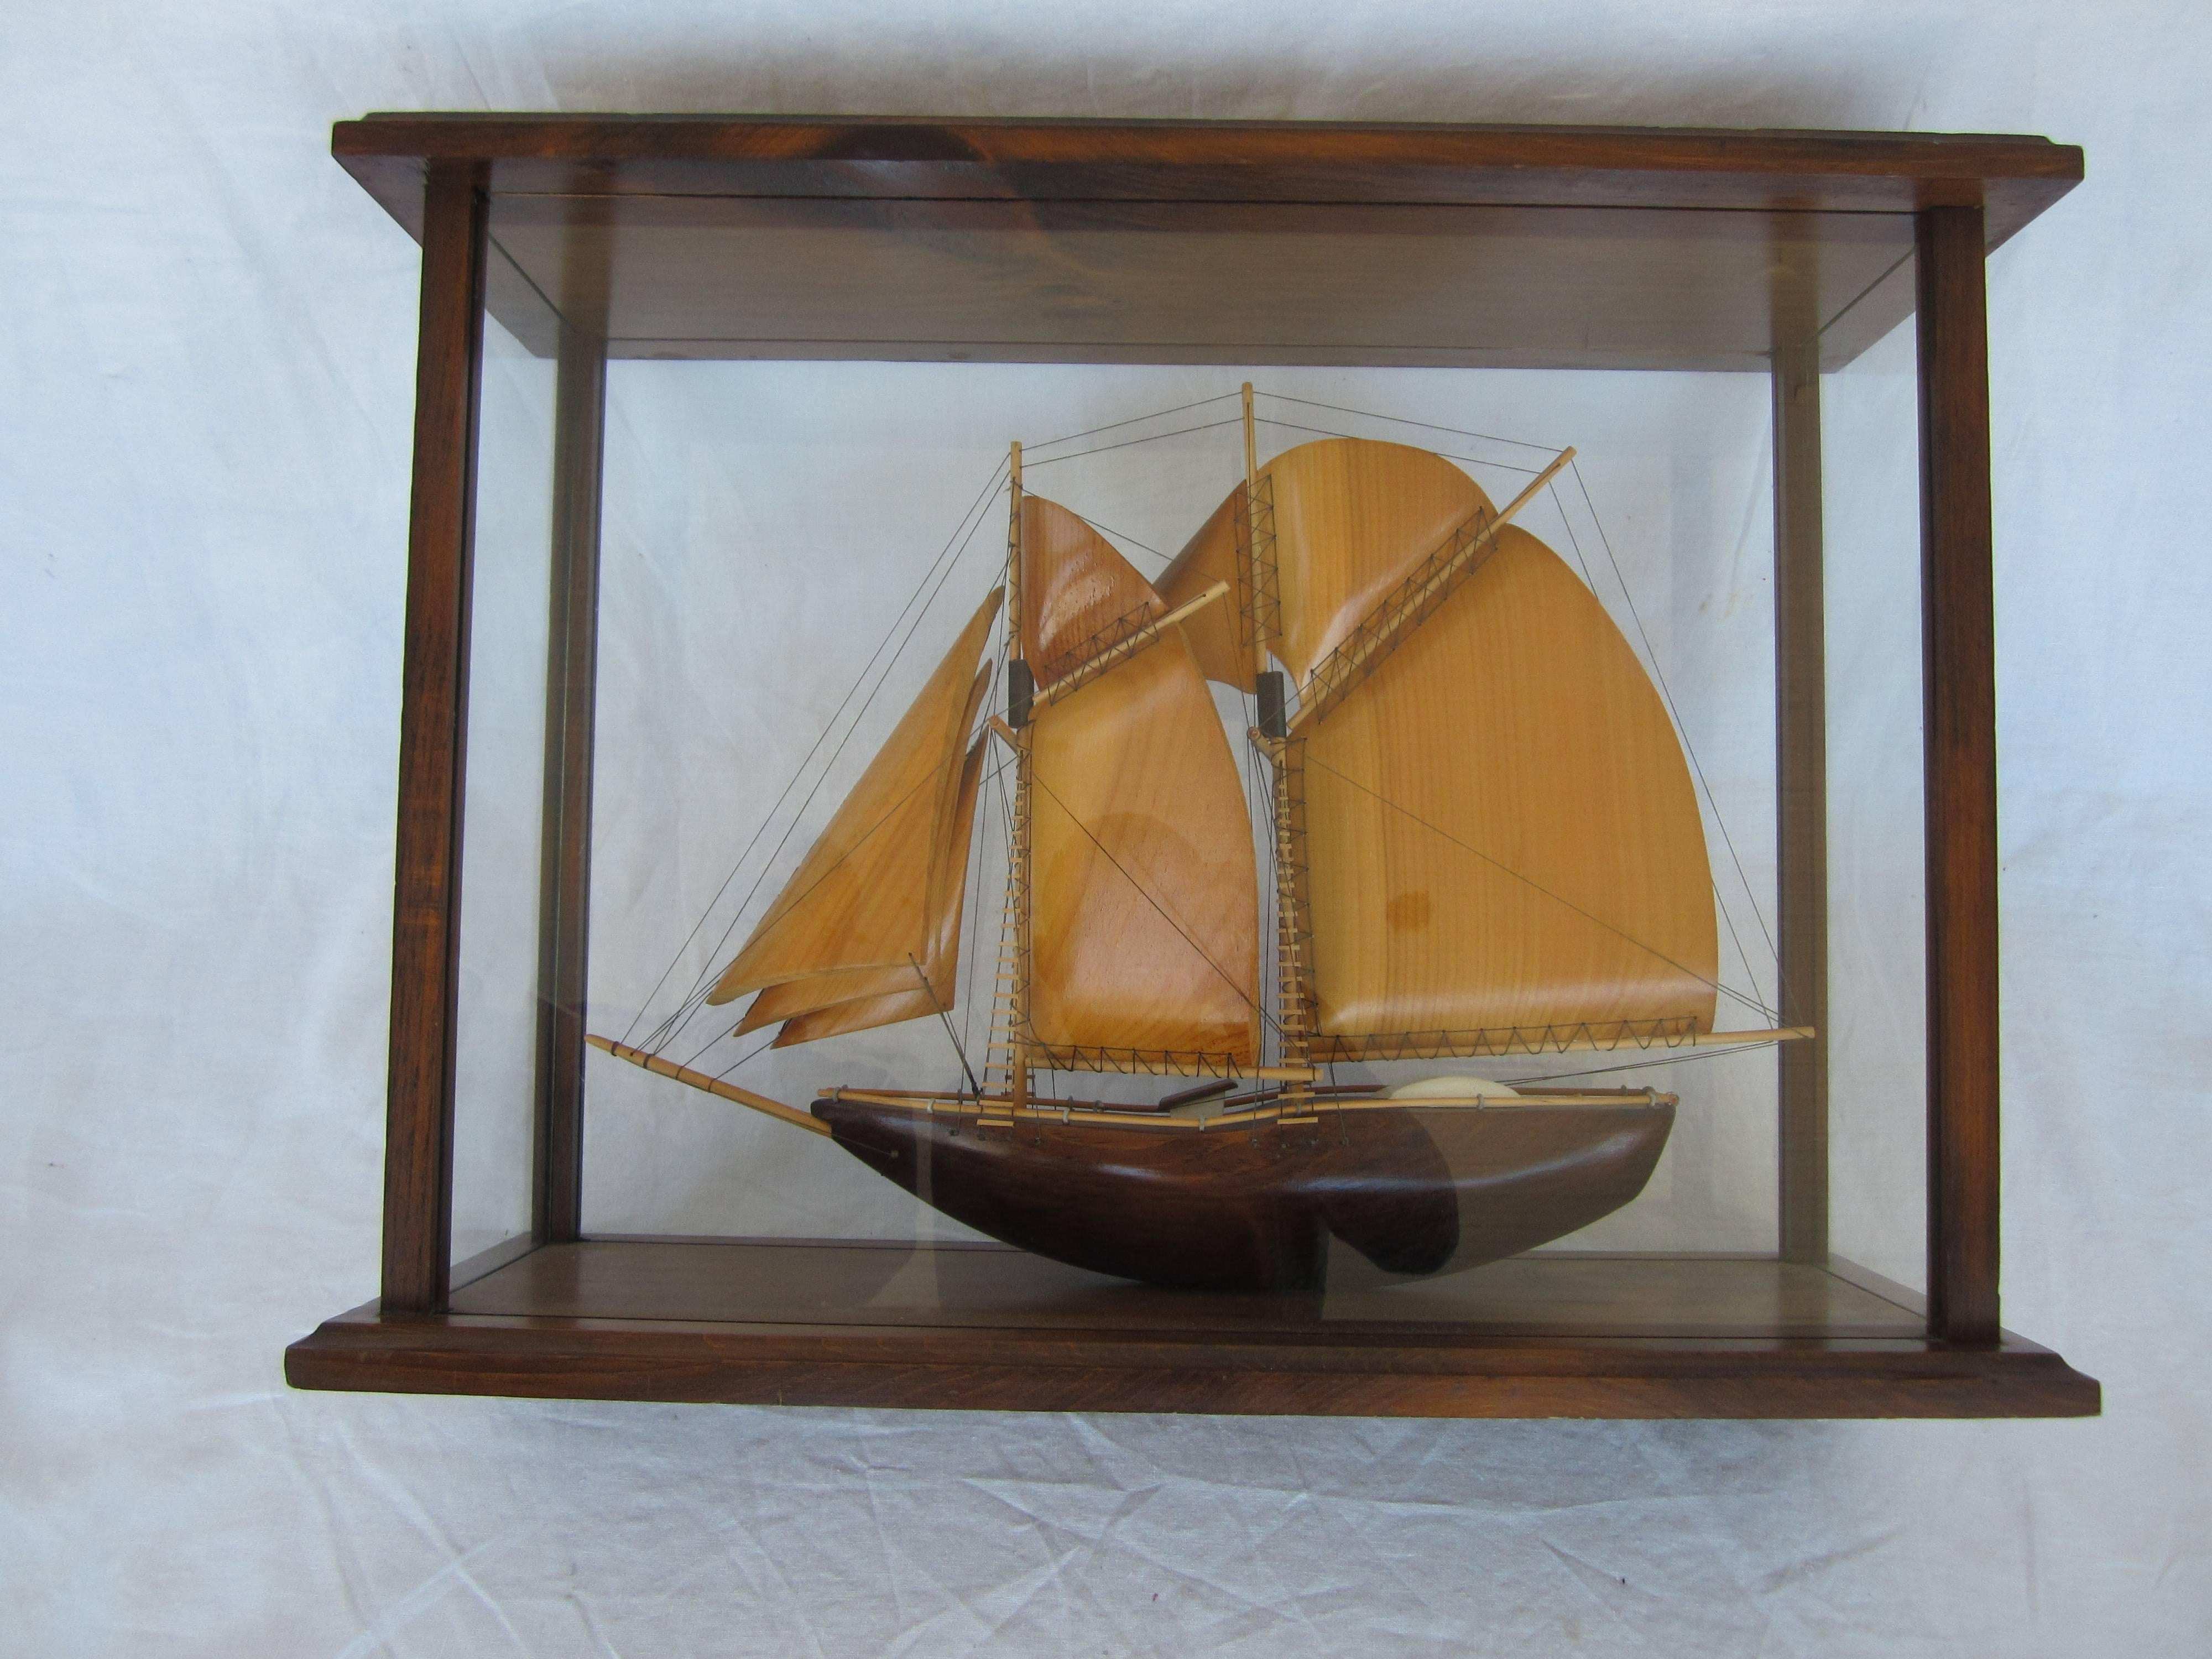 Chinese Ship in a Glass Showcase 1